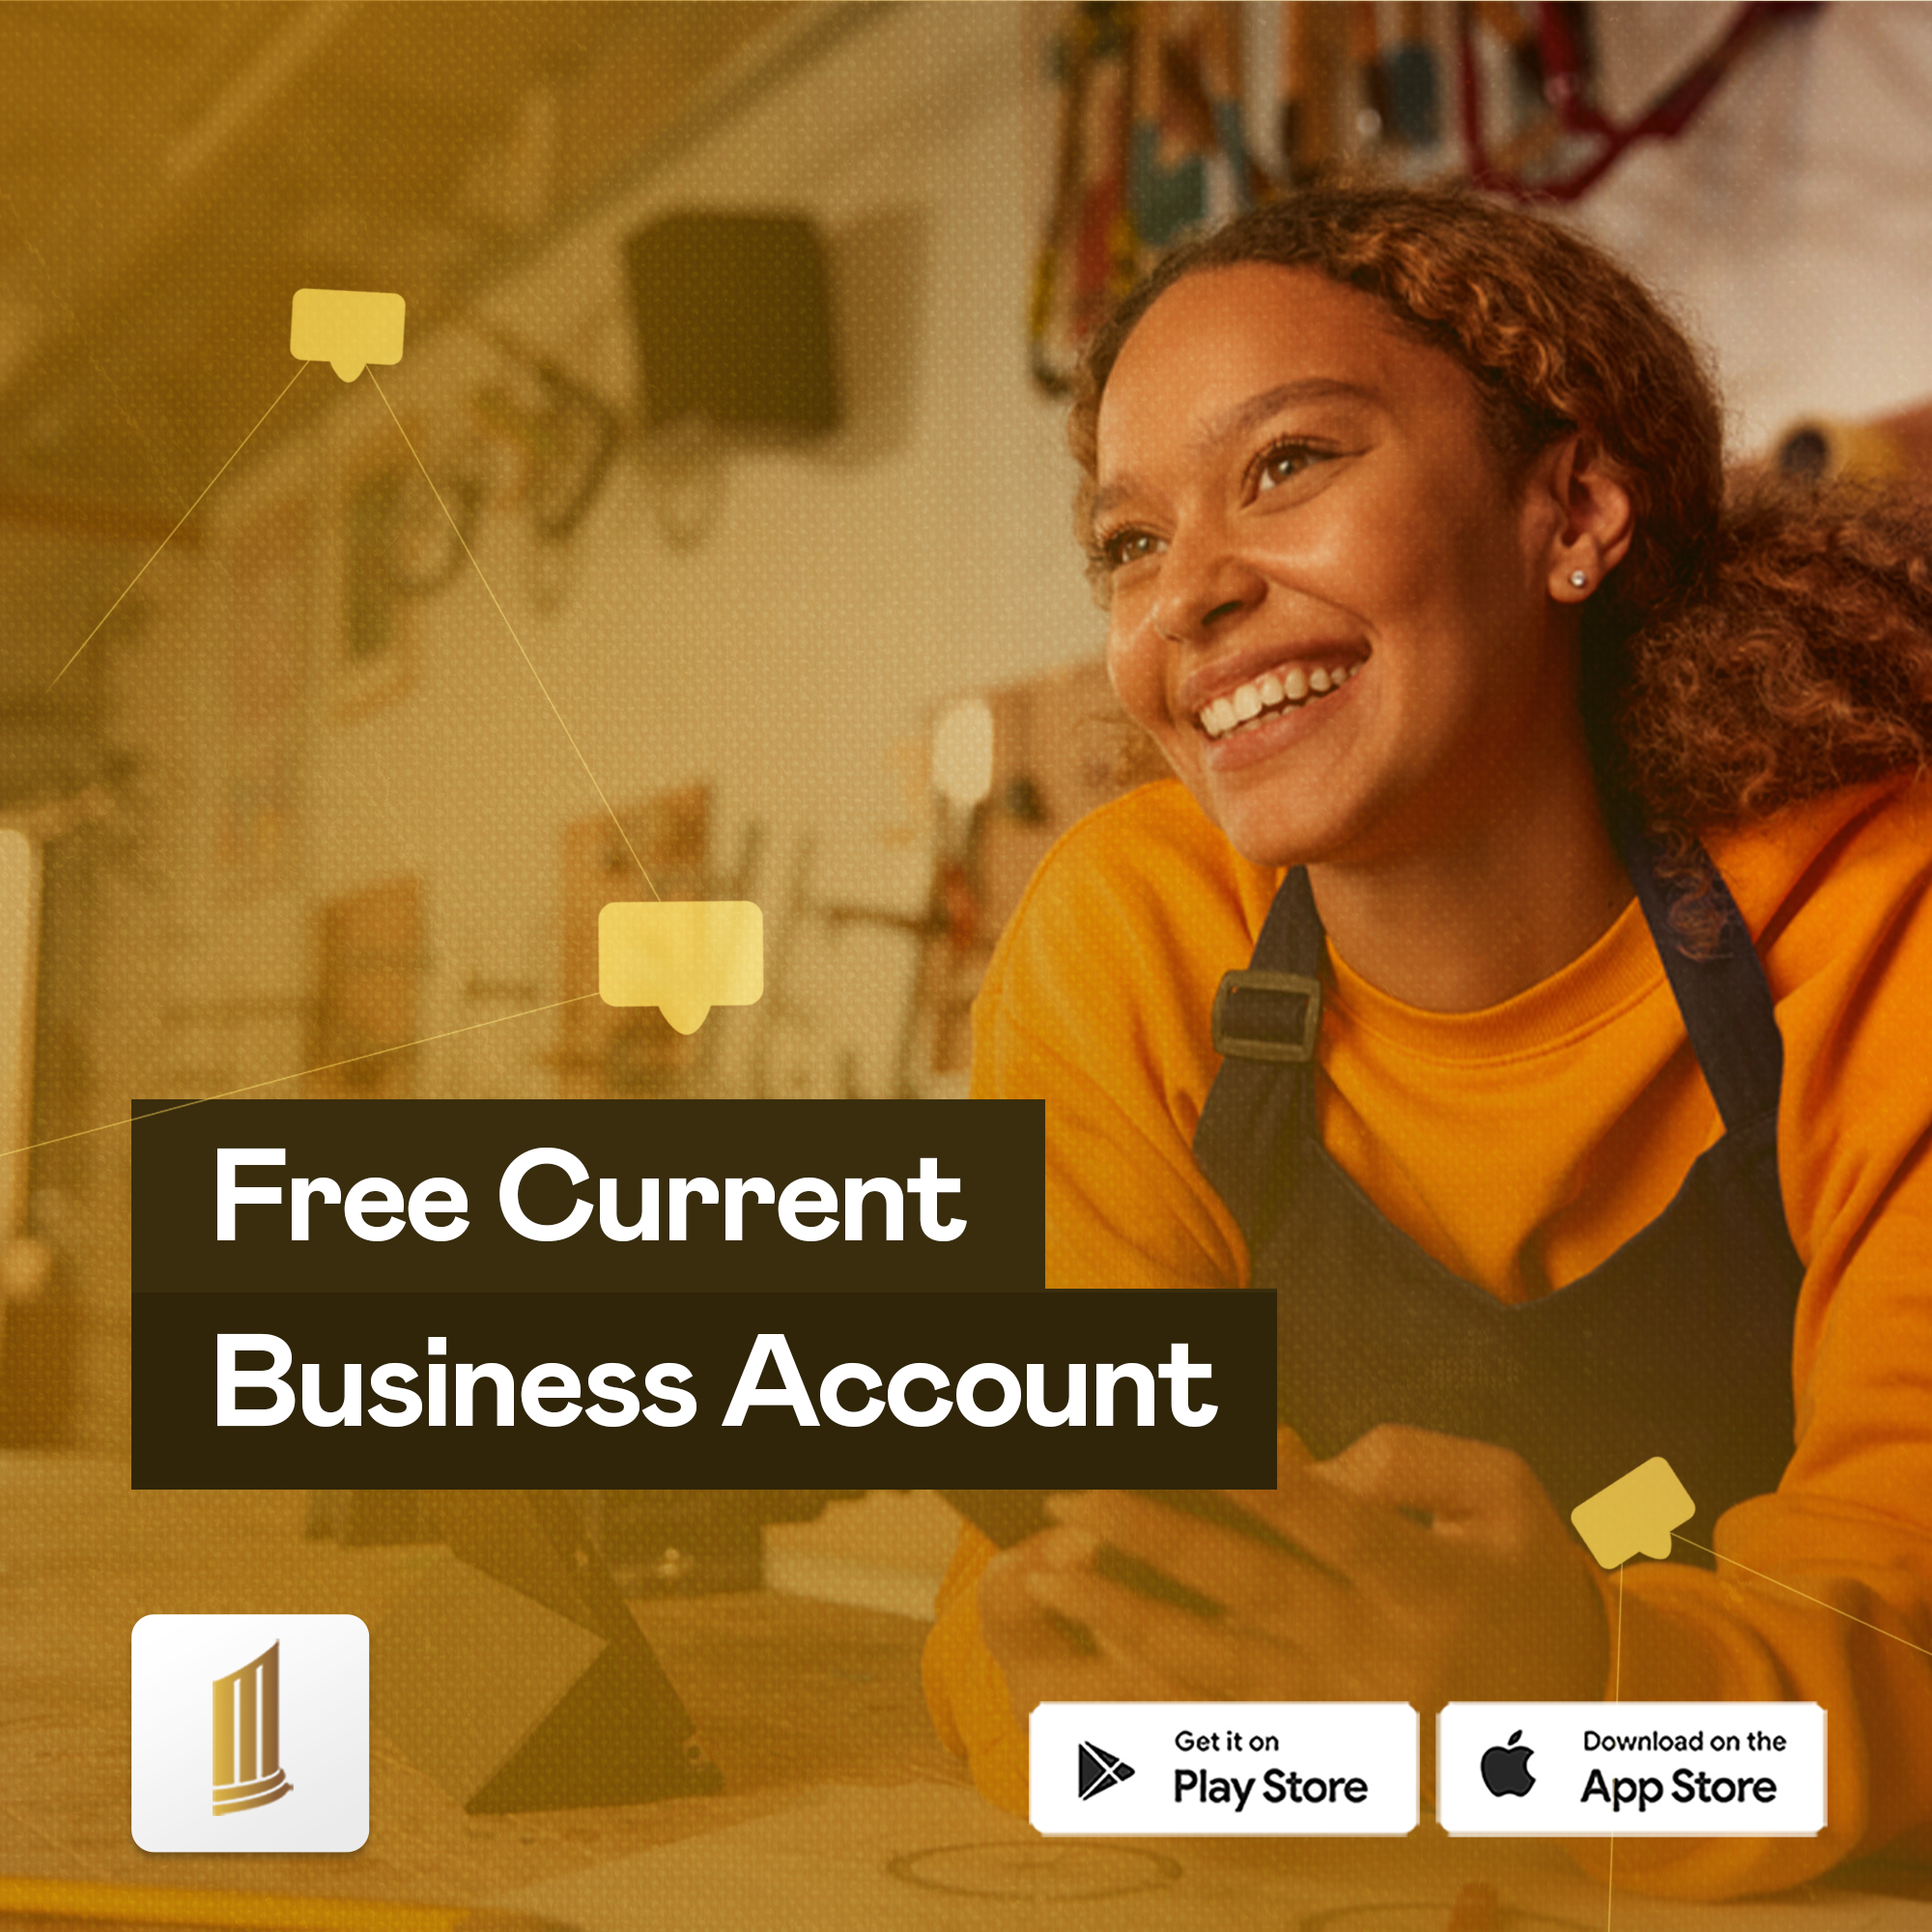 Free current business account